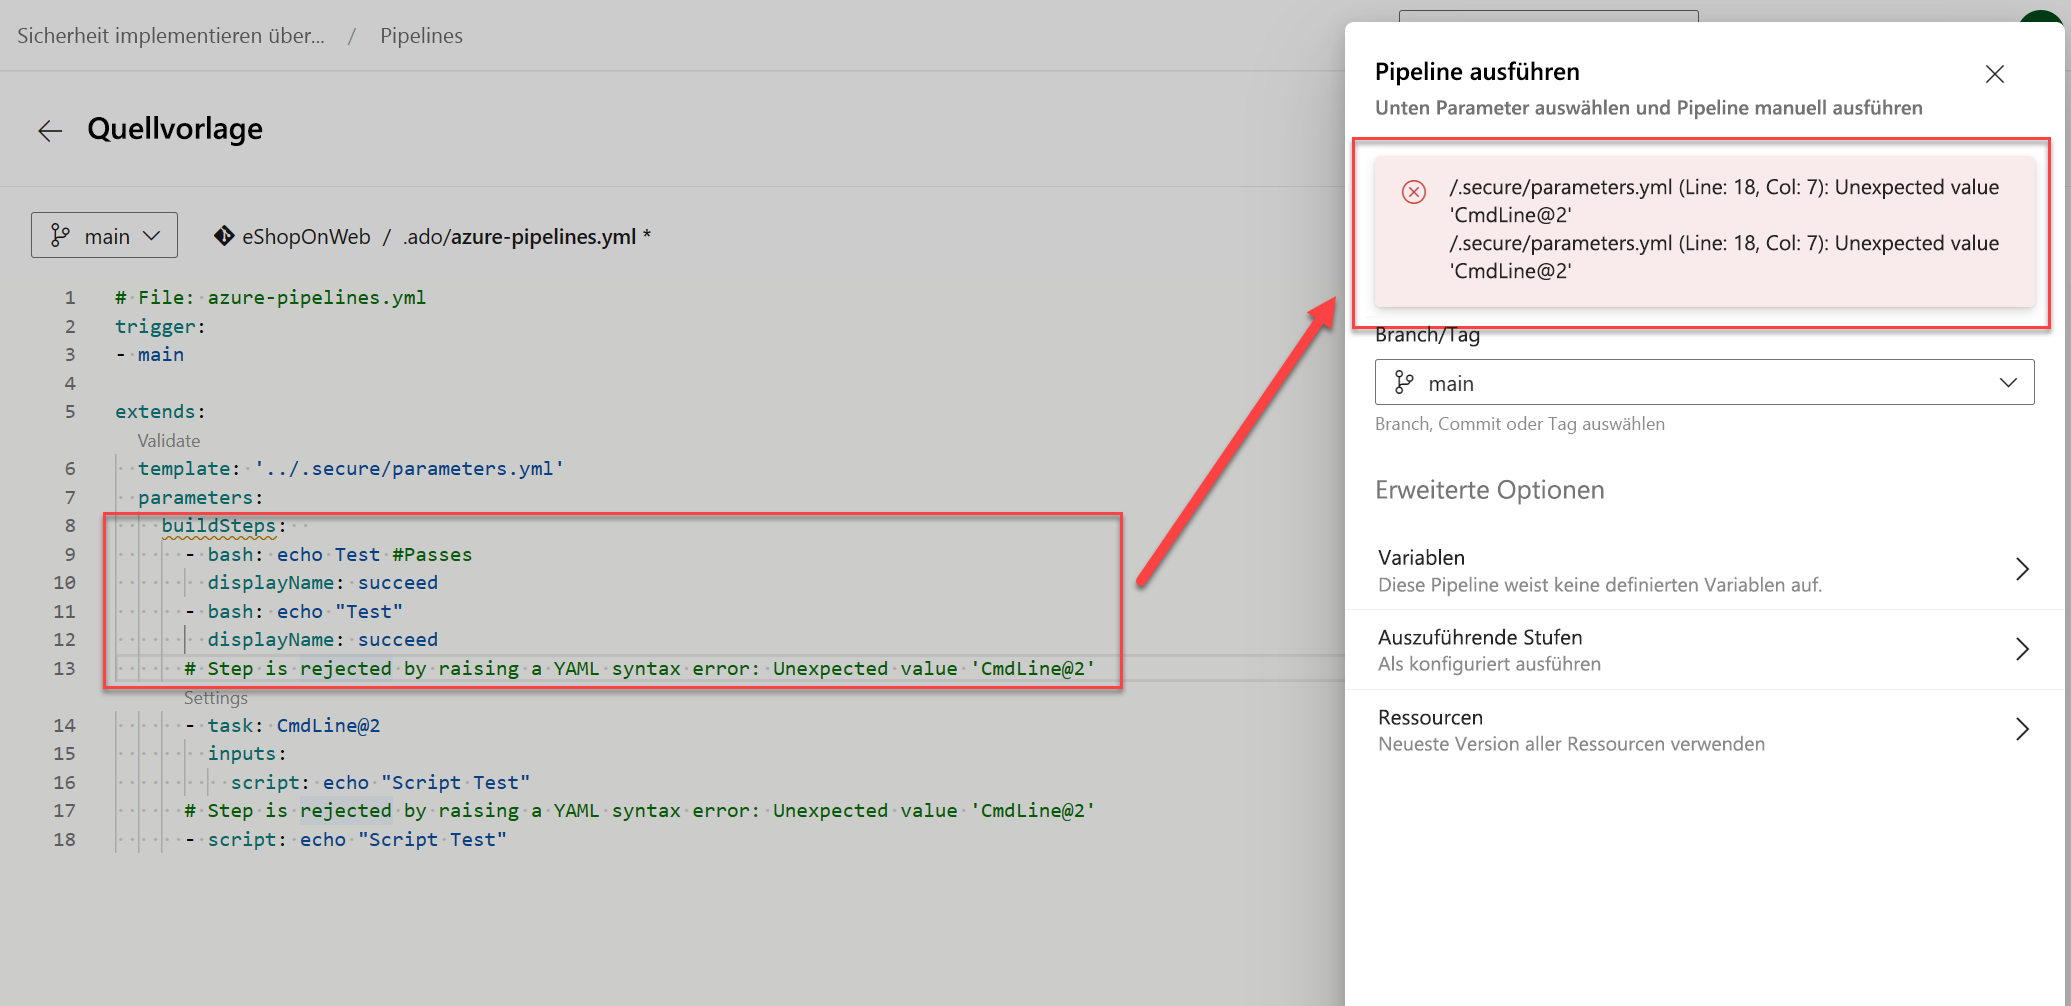 Screenshot of Azure Pipelines showing the step rejected by raising a YAML syntax error unexpected value.